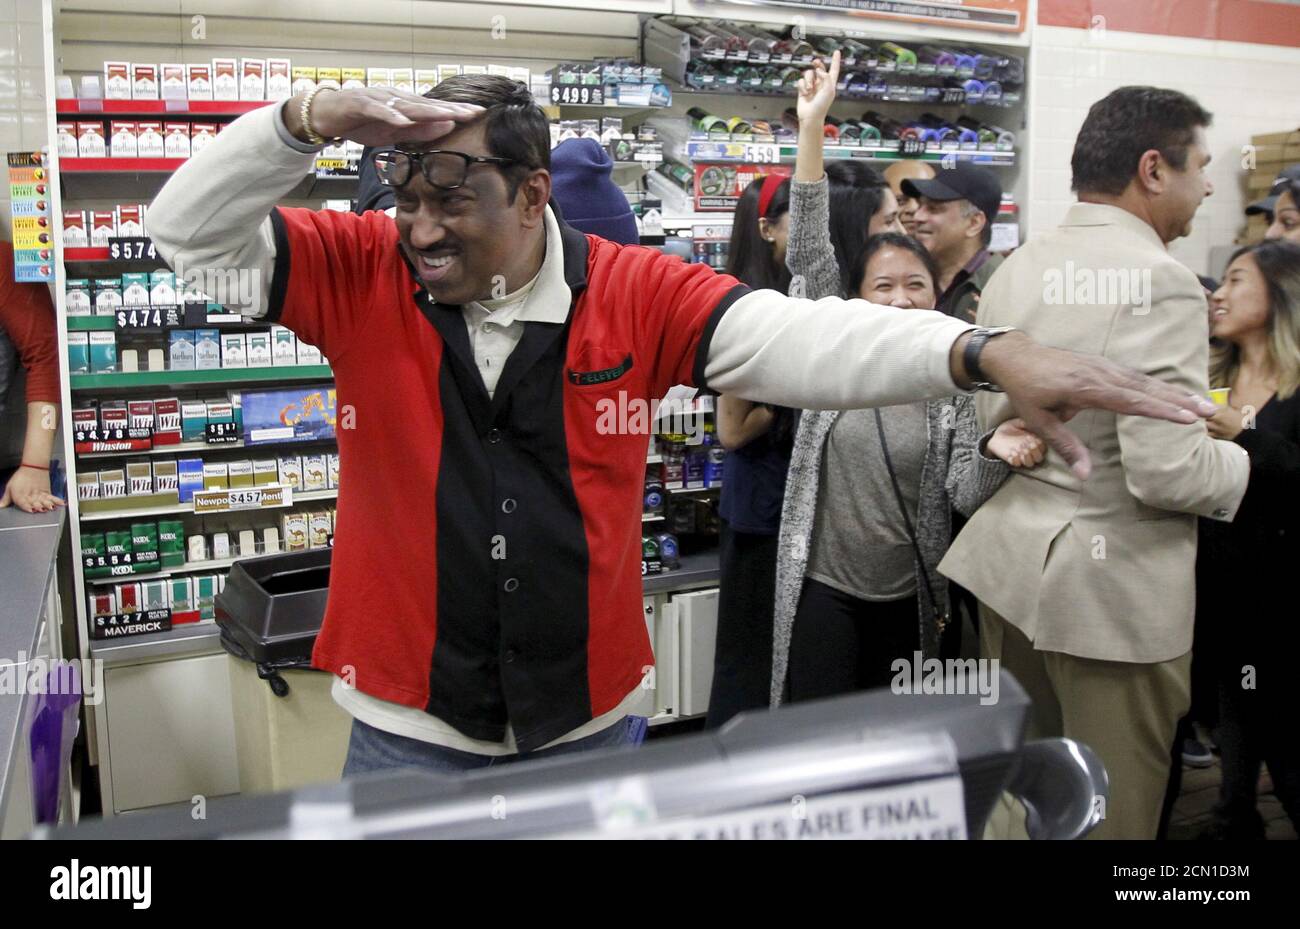 7-Eleven store clerk M. Faroqui celebrates after selling a winning Powerball ticket, in Chino Hills, California January 13, 2016. A winning ticket was sold there for the massive $1.59 billion Powerball lottery on Wednesday, officials said after drawing the winning numbers for the world's largest potential jackpot for a single player. REUTERS/Alex Gallardo Stock Photo